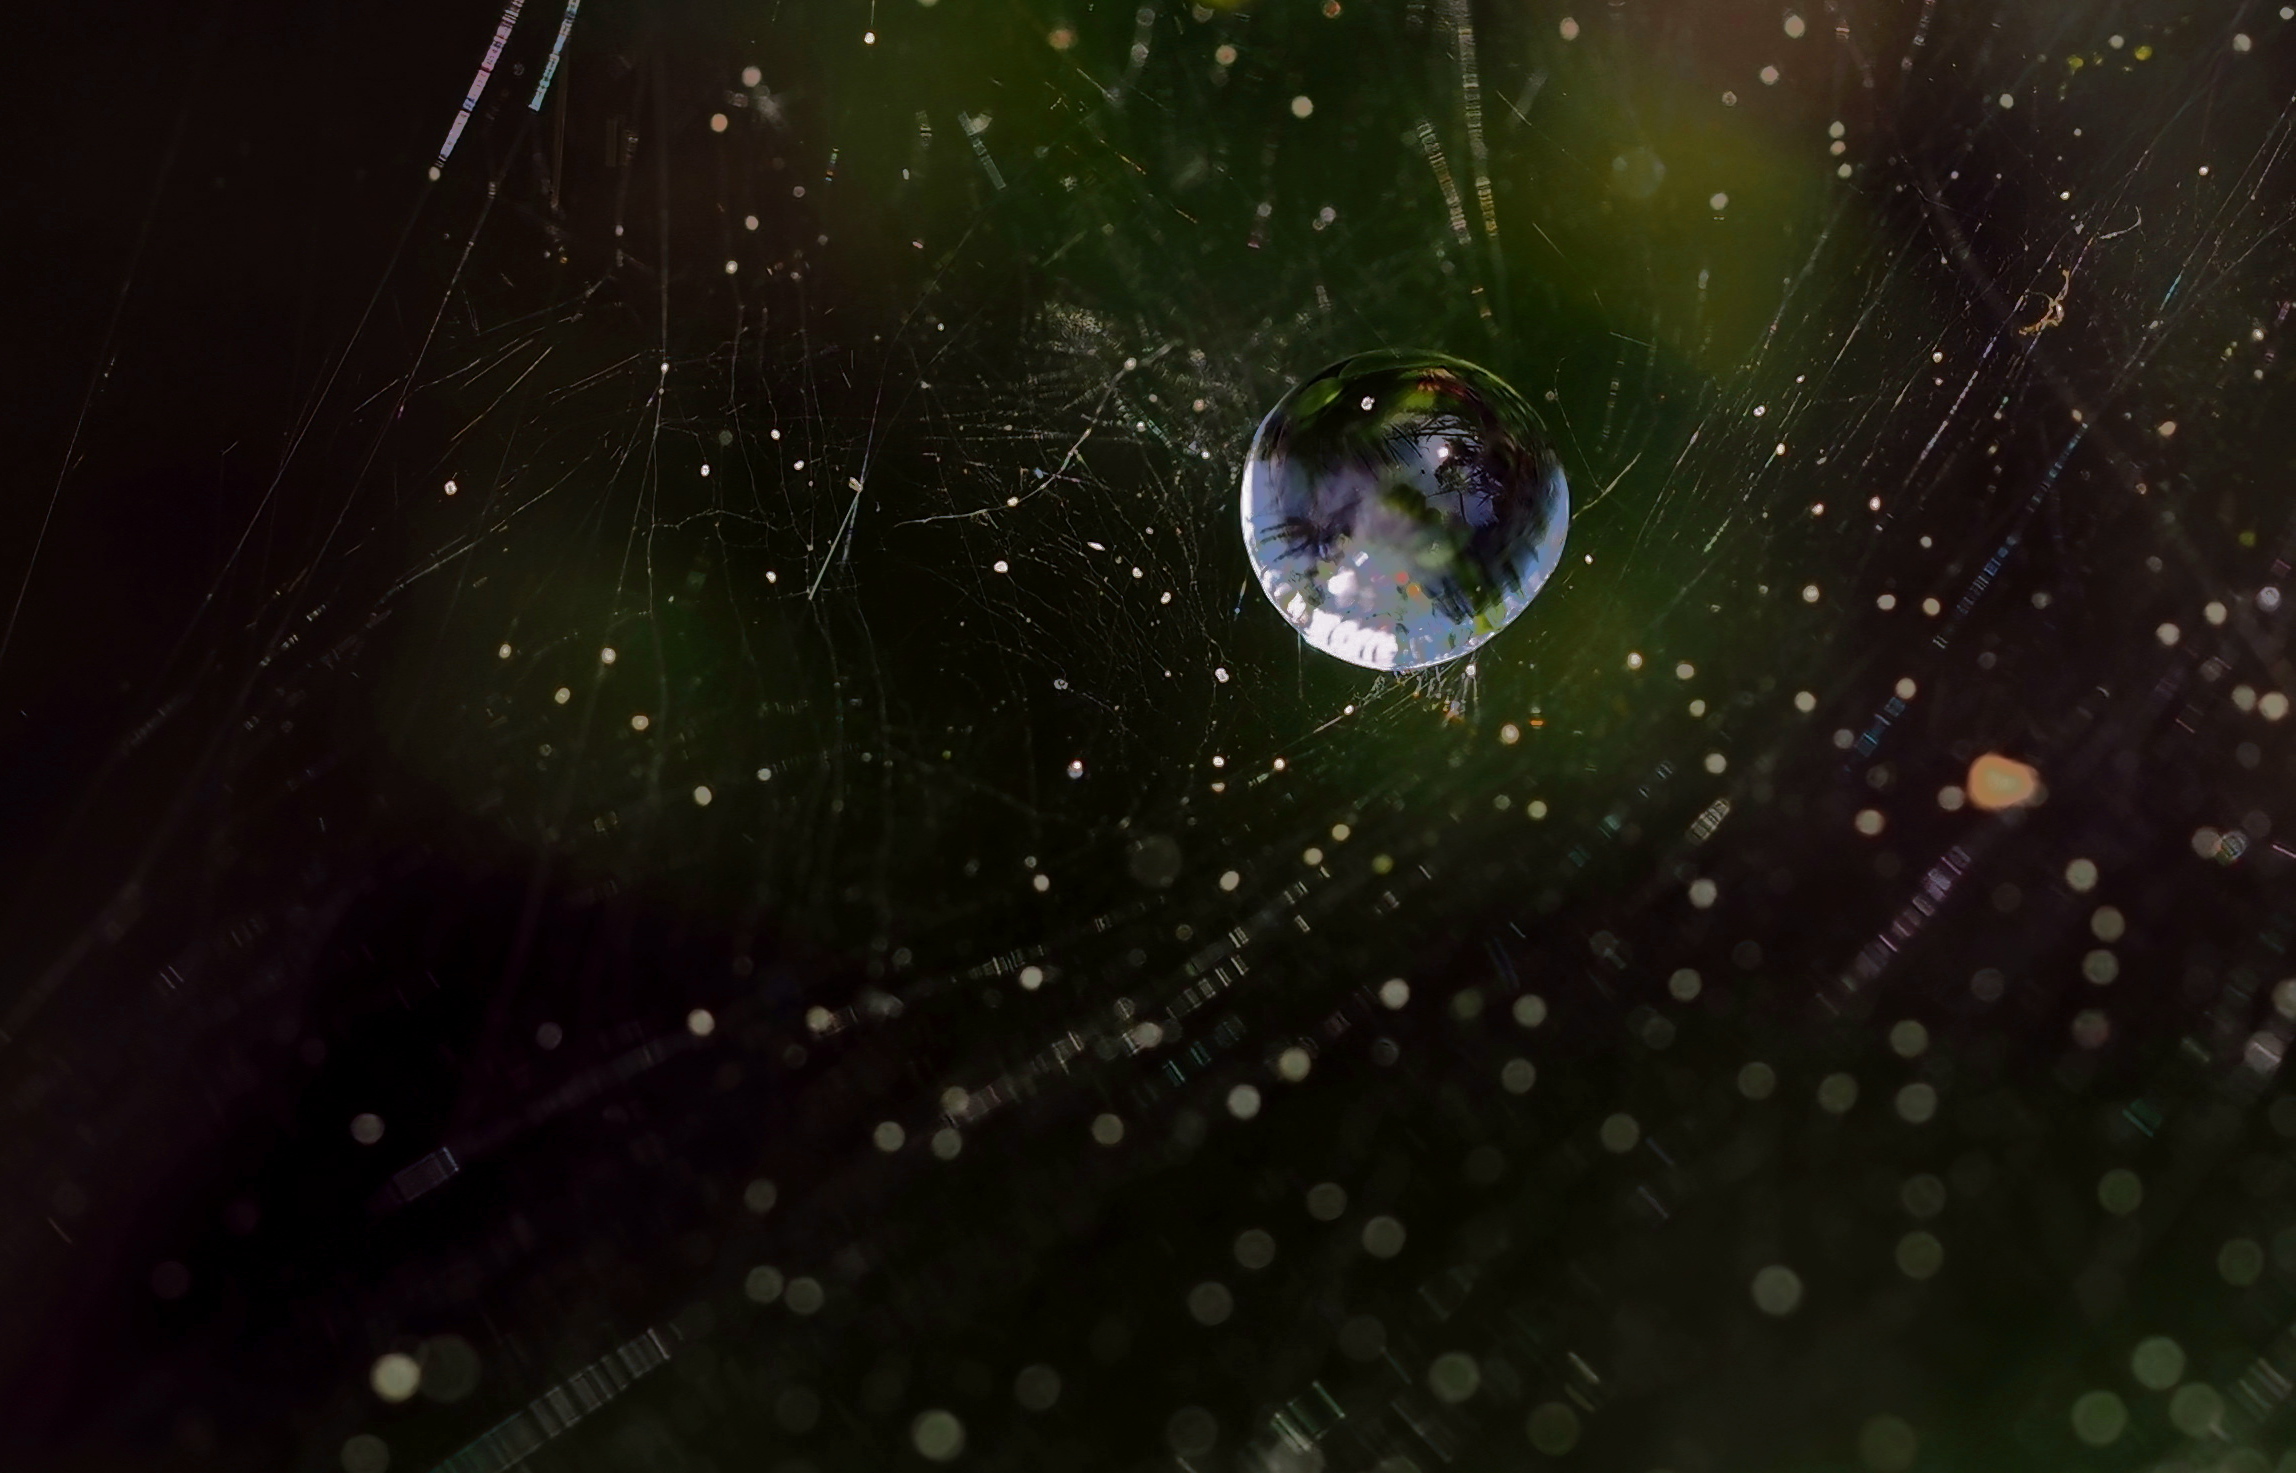 The world in a drop...